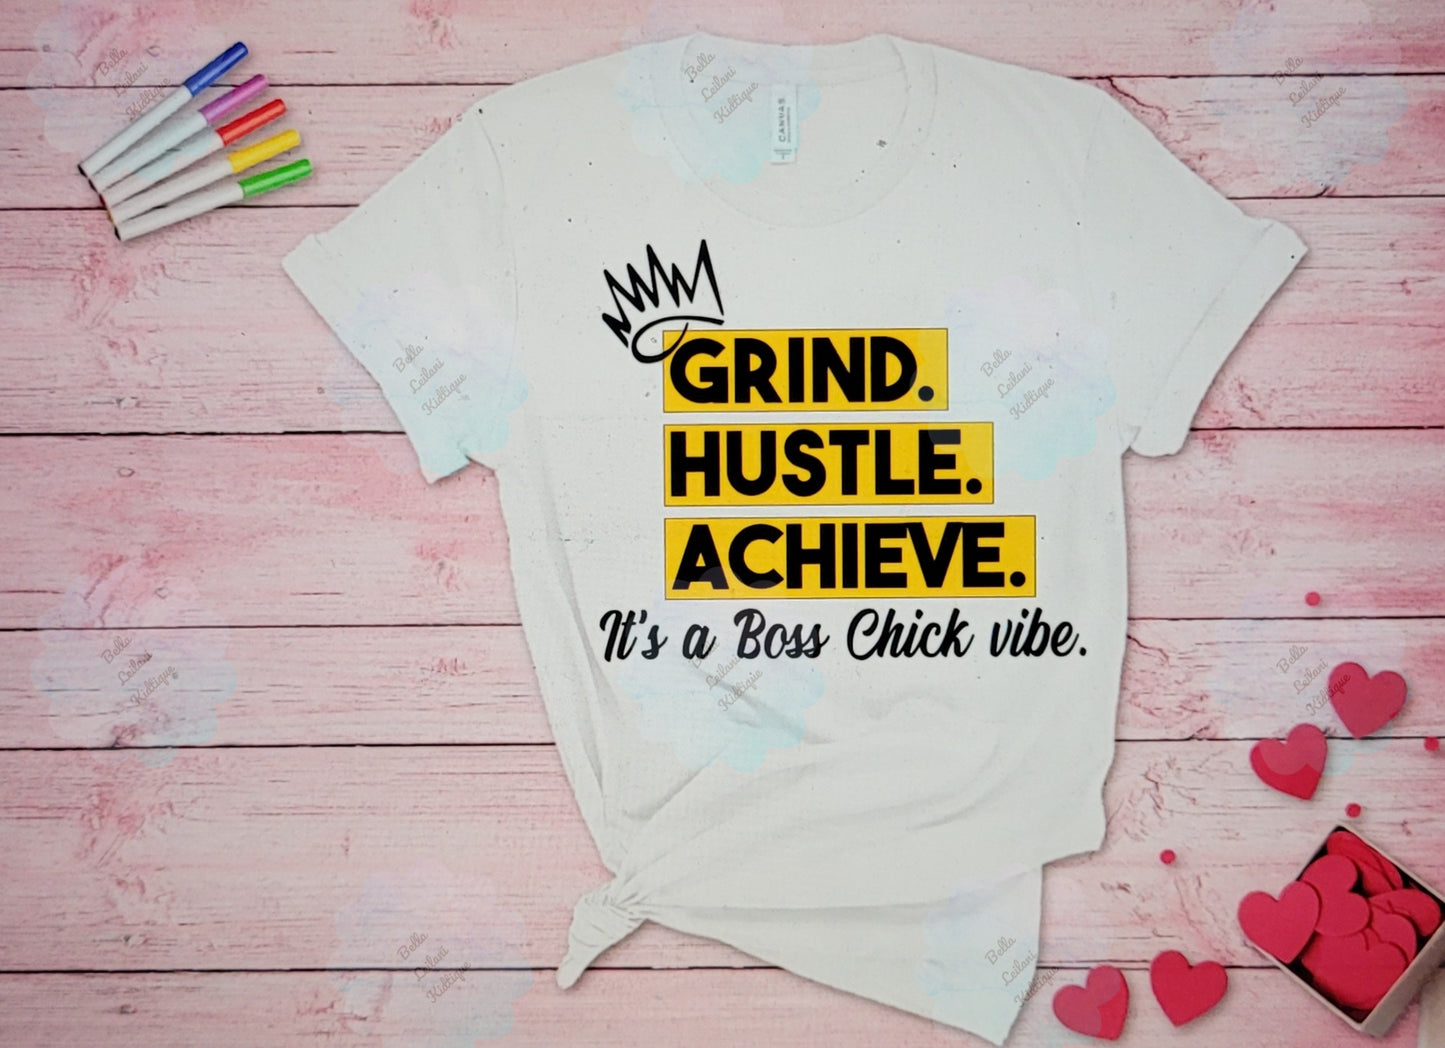 Boss Chick Vibes- Grind